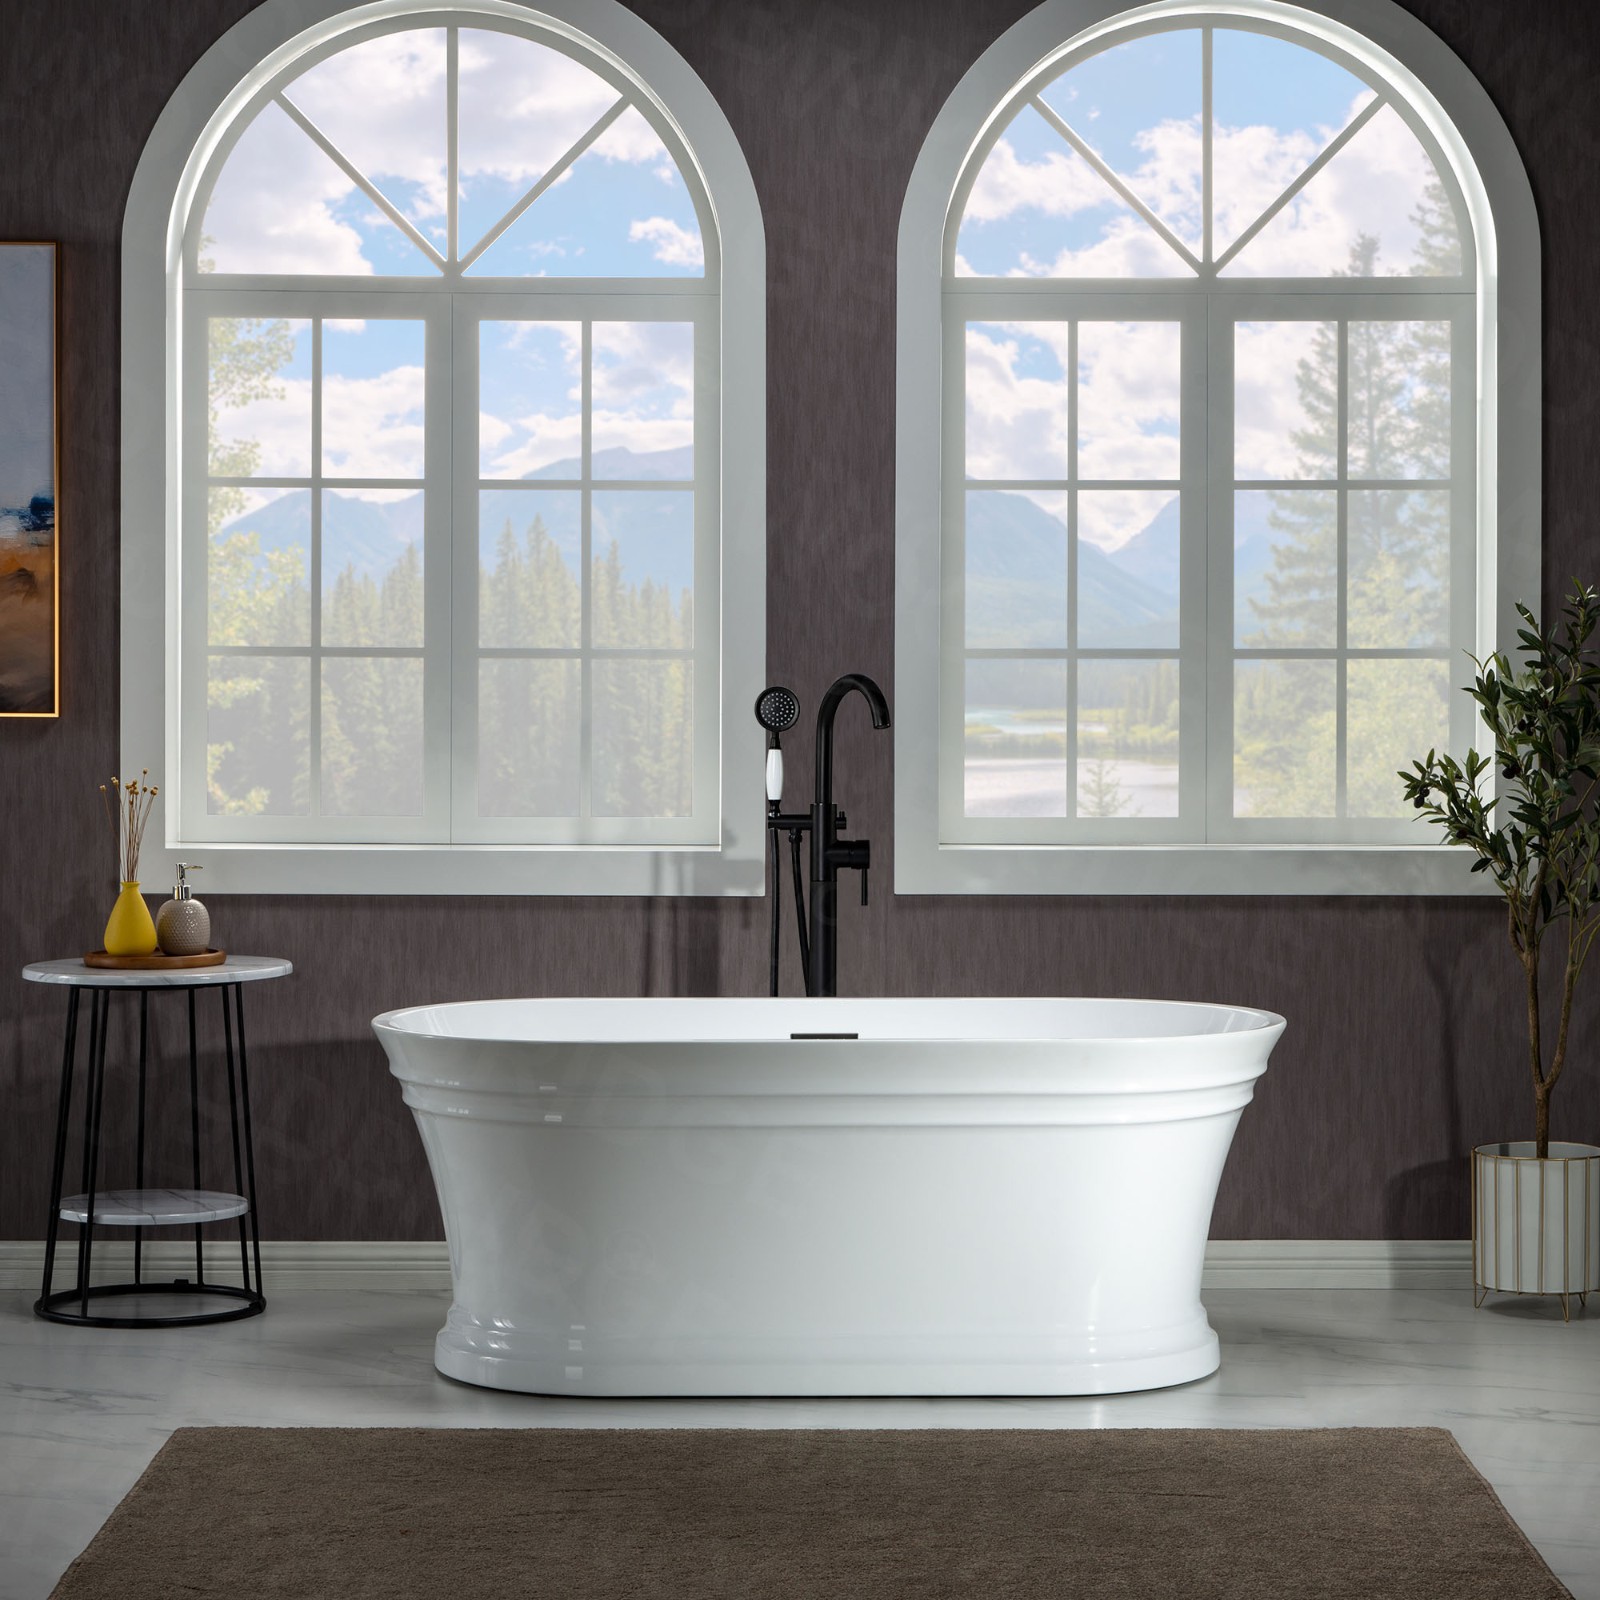  WOODBRIDGE 59 in. Freestanding Double Ended Acrylic Soaking Bathtub with Center Drain Assembly and Overflow, BTA1536/B1536, Glossy White_7780